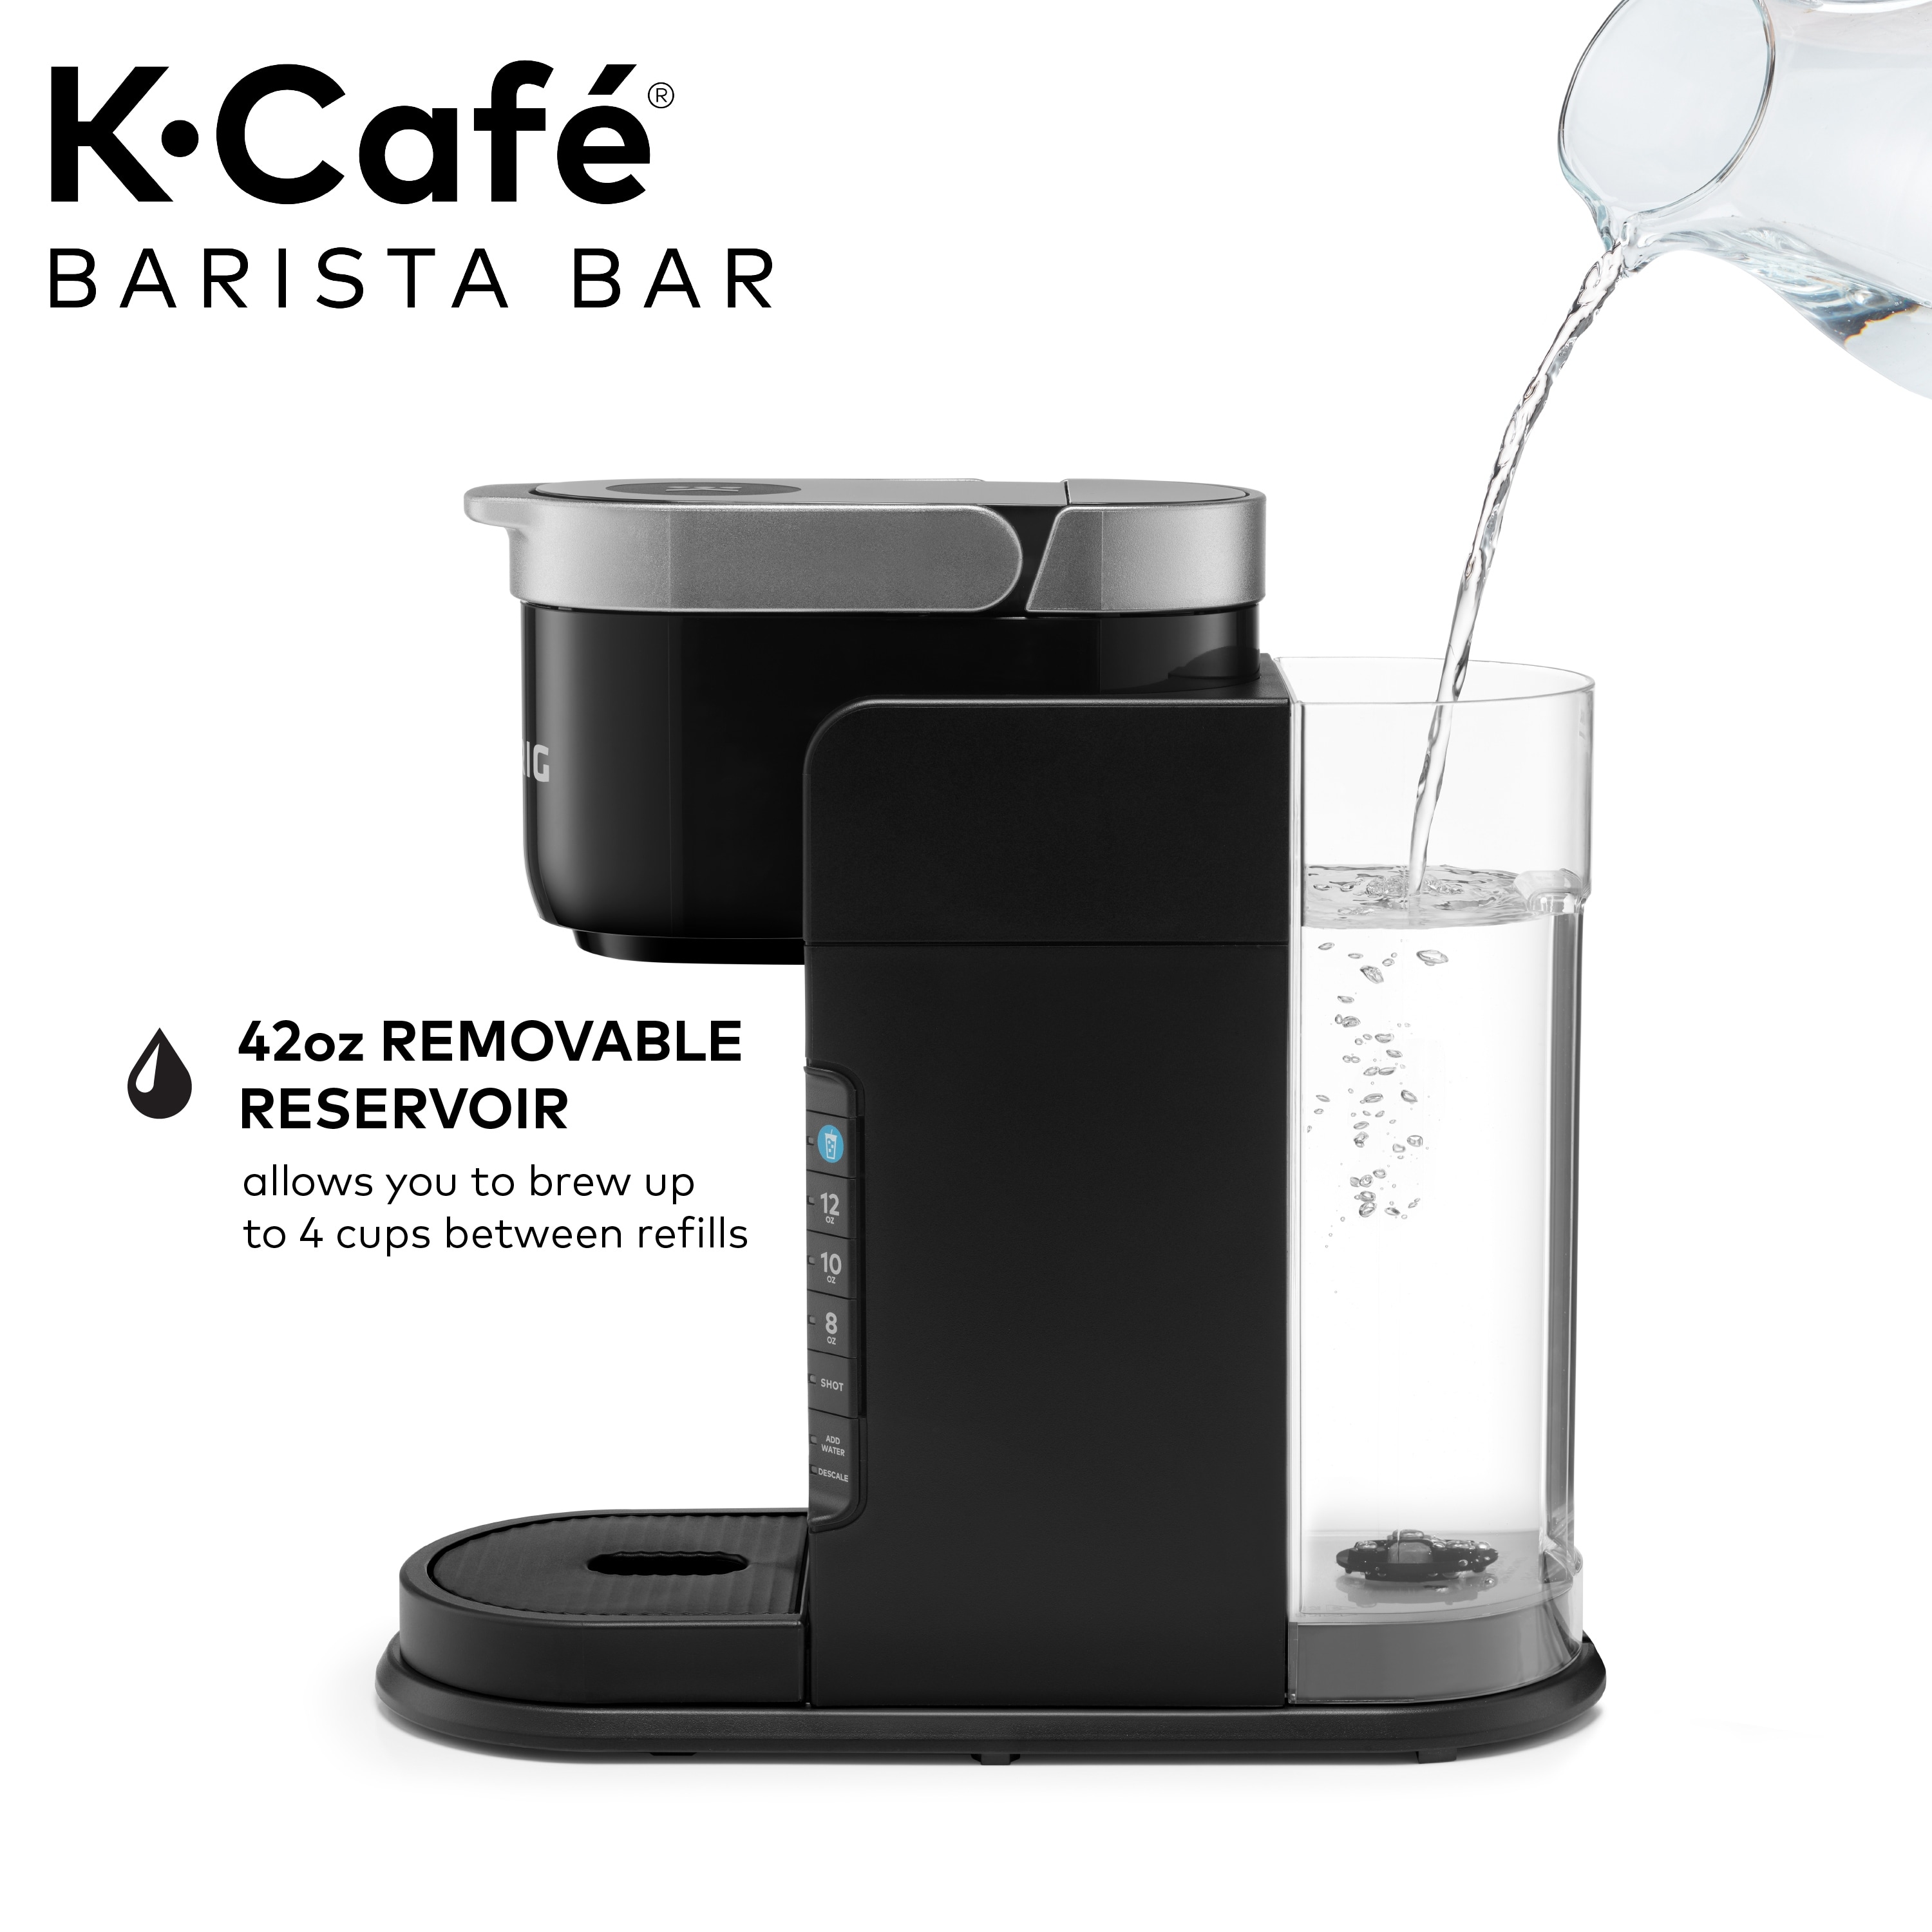 https://ak1.ostkcdn.com/images/products/is/images/direct/76a713f4112e029d565b5e7b661e647fd0311331/Keurig%C2%AE-K-Caf%C3%A9-Barista-Bar-Single-Serve-Coffee-Maker-and-Frother.jpg